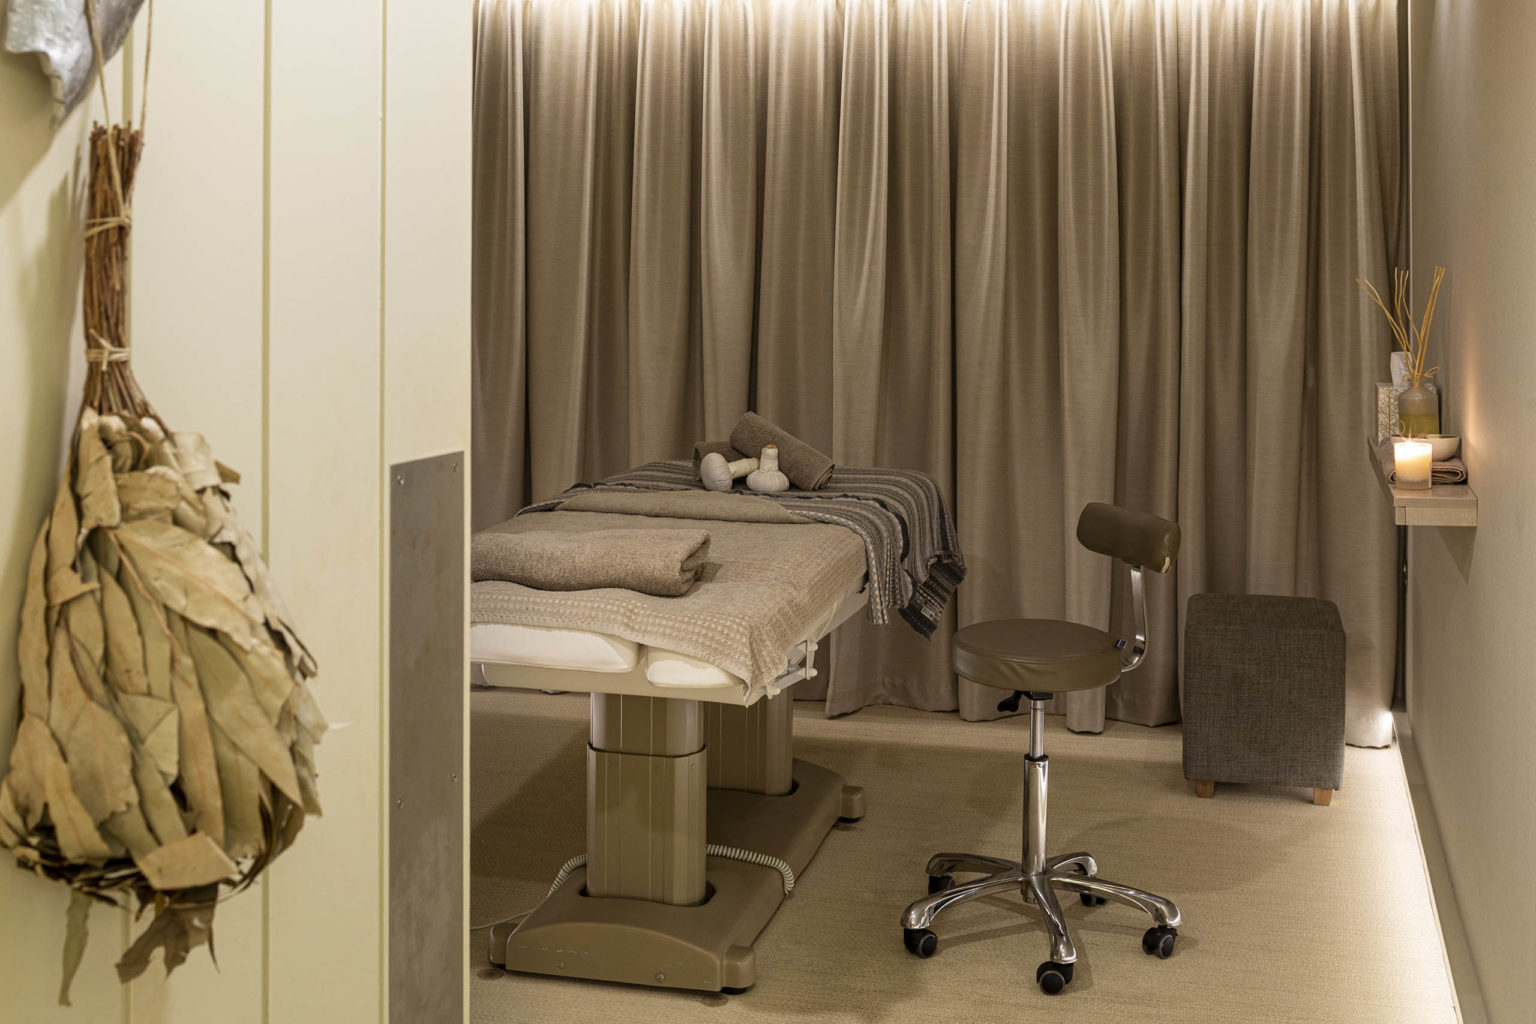 A luxury spa treatment room used for massages, facials and spa days at Swinton Country Club and Spa near Harrogate and the Yorkshire Dales in North Yorkshire